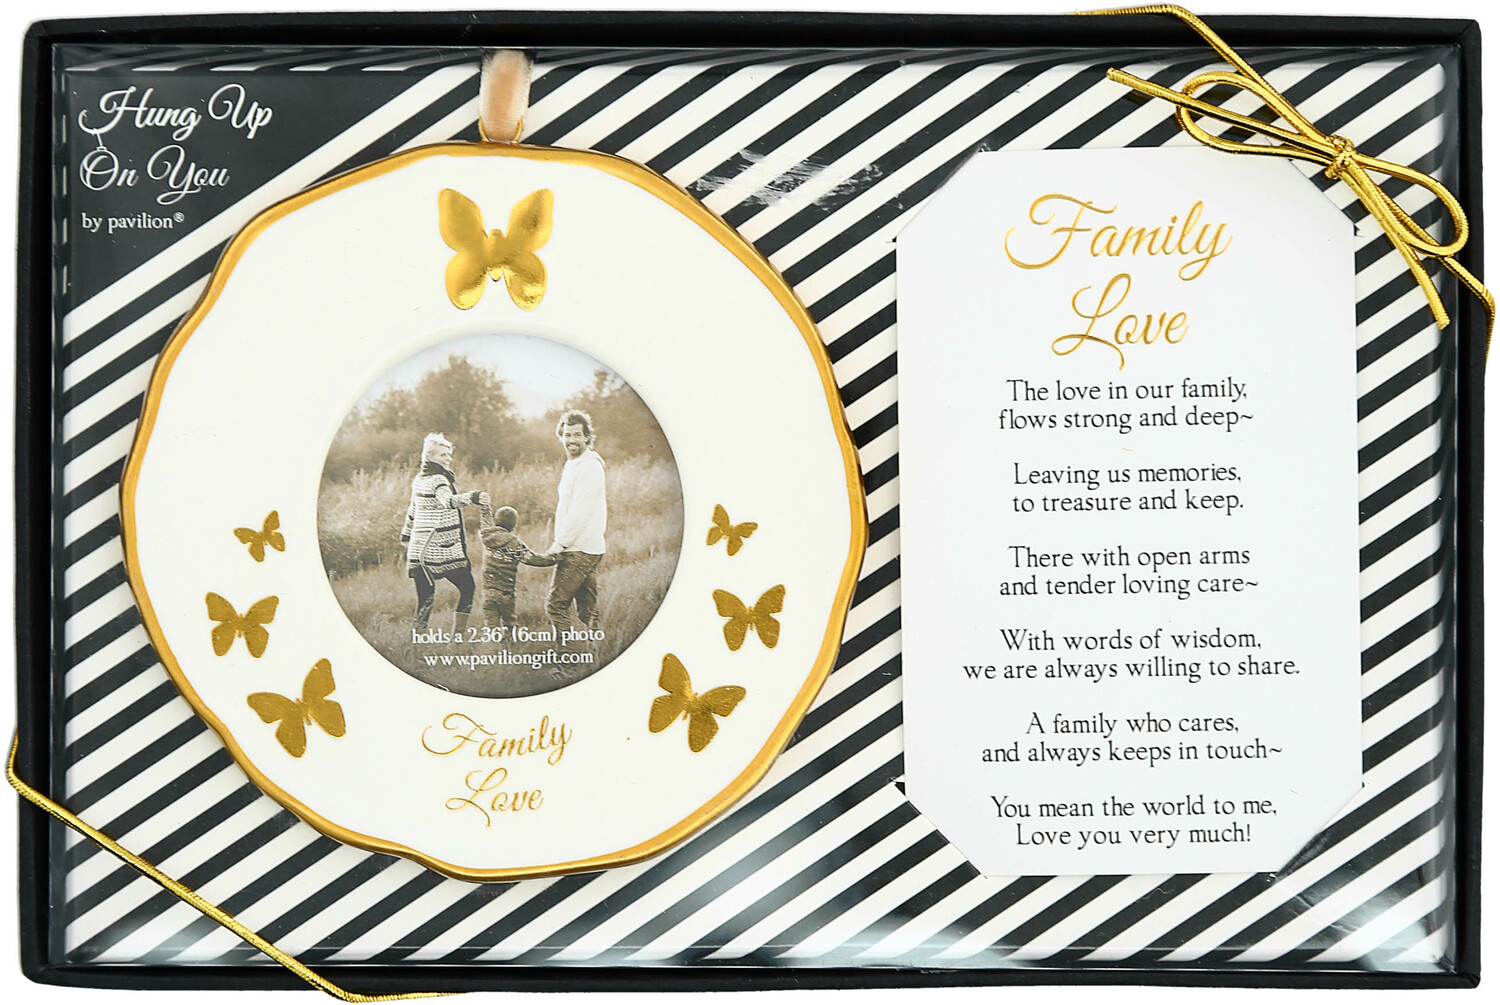 Family Love by Hung Up on You - Family Love - 4" Photo Frame Ornament
